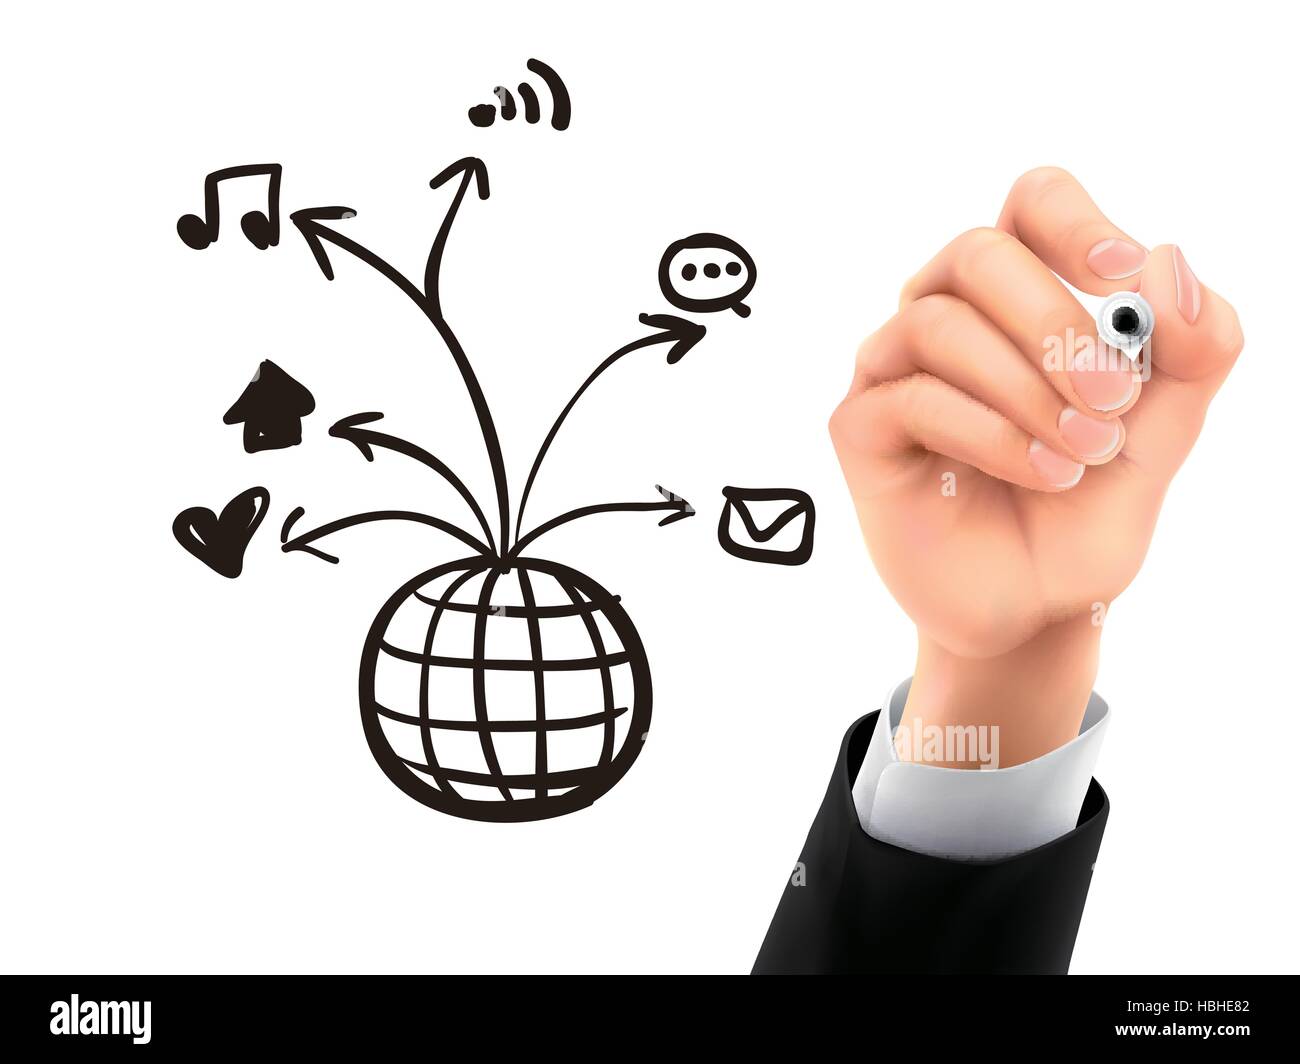 social media concept drawn by hand on a transparent board Stock Vector